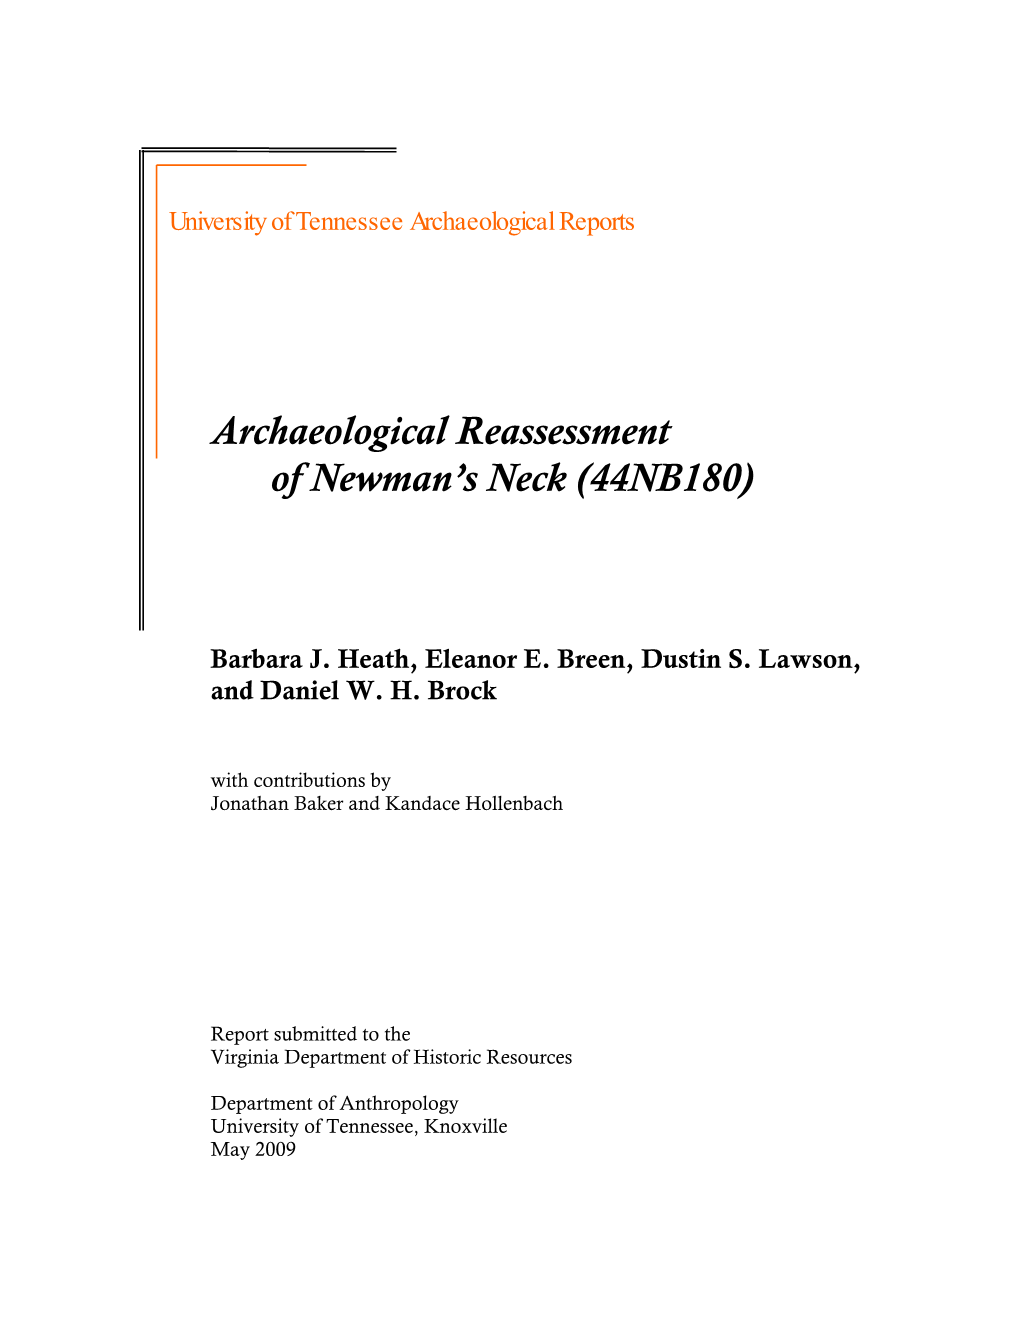 Archaeological Reassessment of Newman's Neck (44NB180)